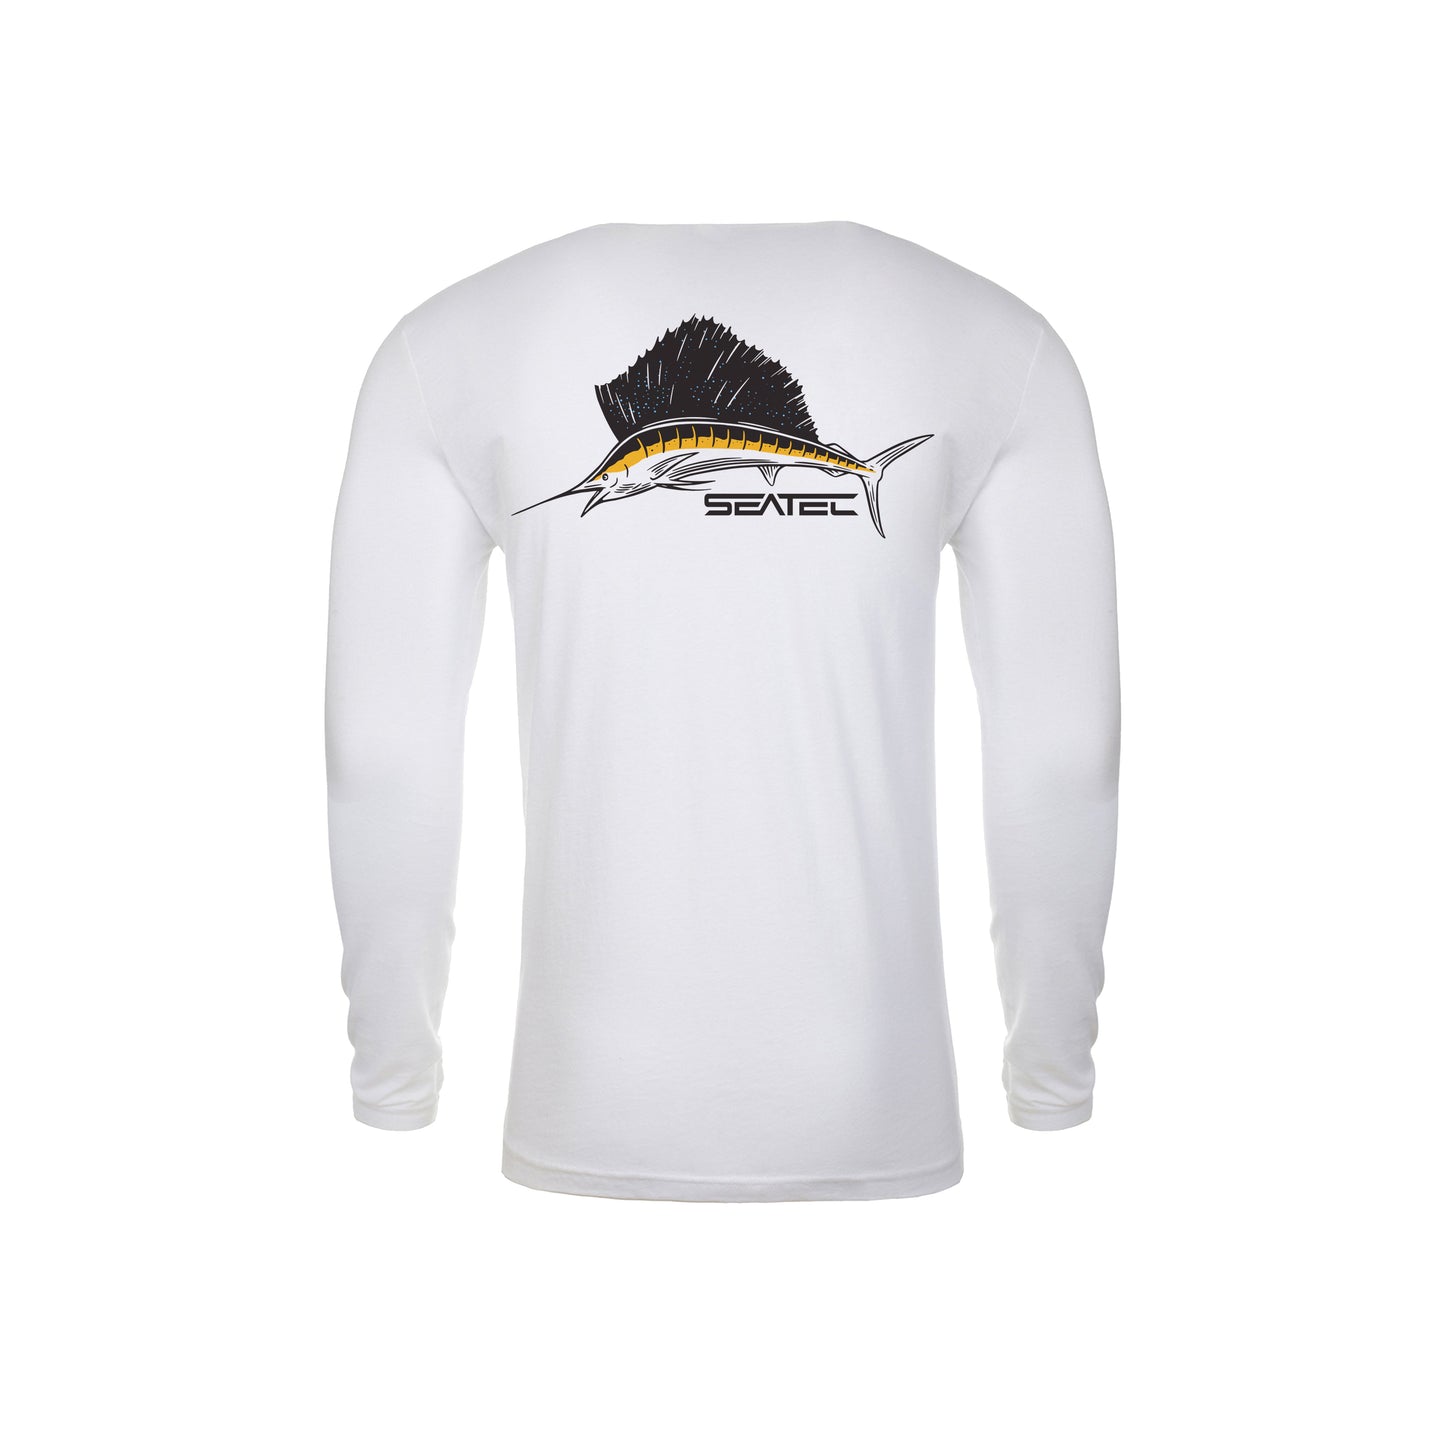 Seatec Outfitters Men's FlyLong Sleeve Fishing Shirts - Best Fishing Shirt - UPF 50+, Snag Resistant, Moisture Wicking Large